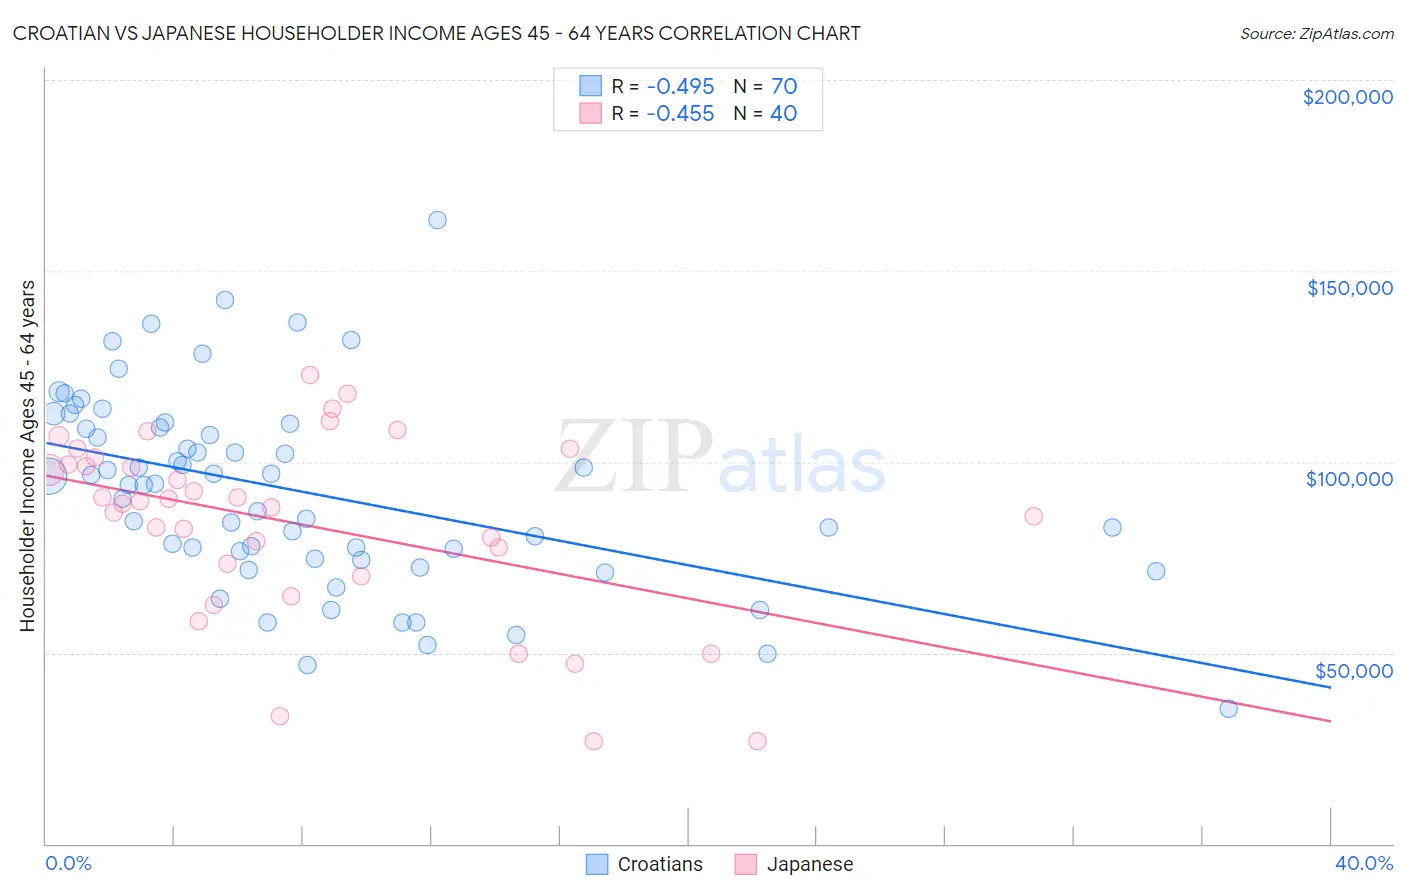 Croatian vs Japanese Householder Income Ages 45 - 64 years